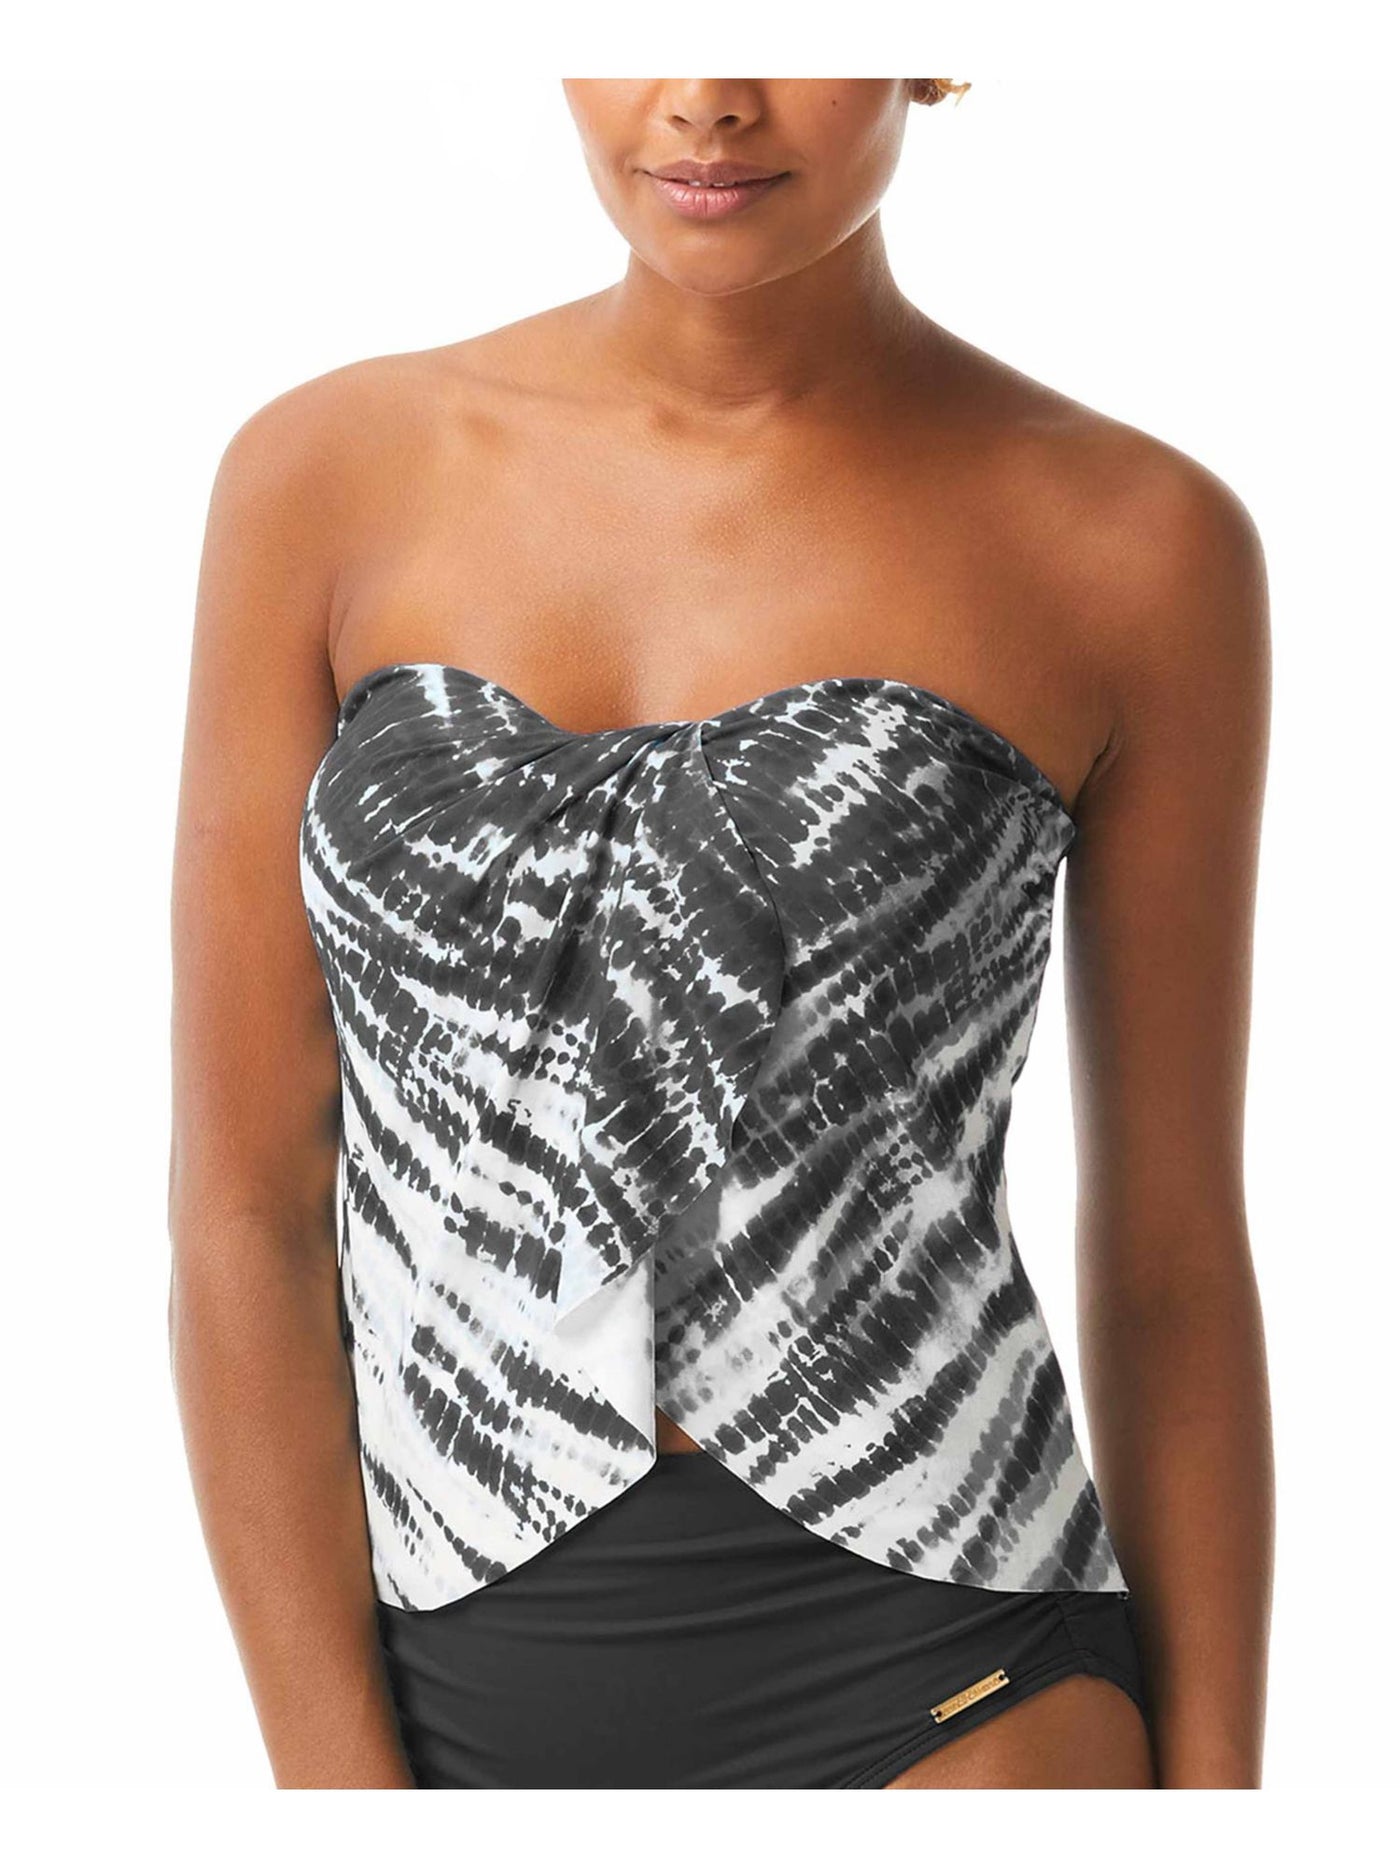 VINCE CAMUTO SWIM Women's Black Printed Stretch Lined Sweetheart Layered Tankini Swimsuit Top S